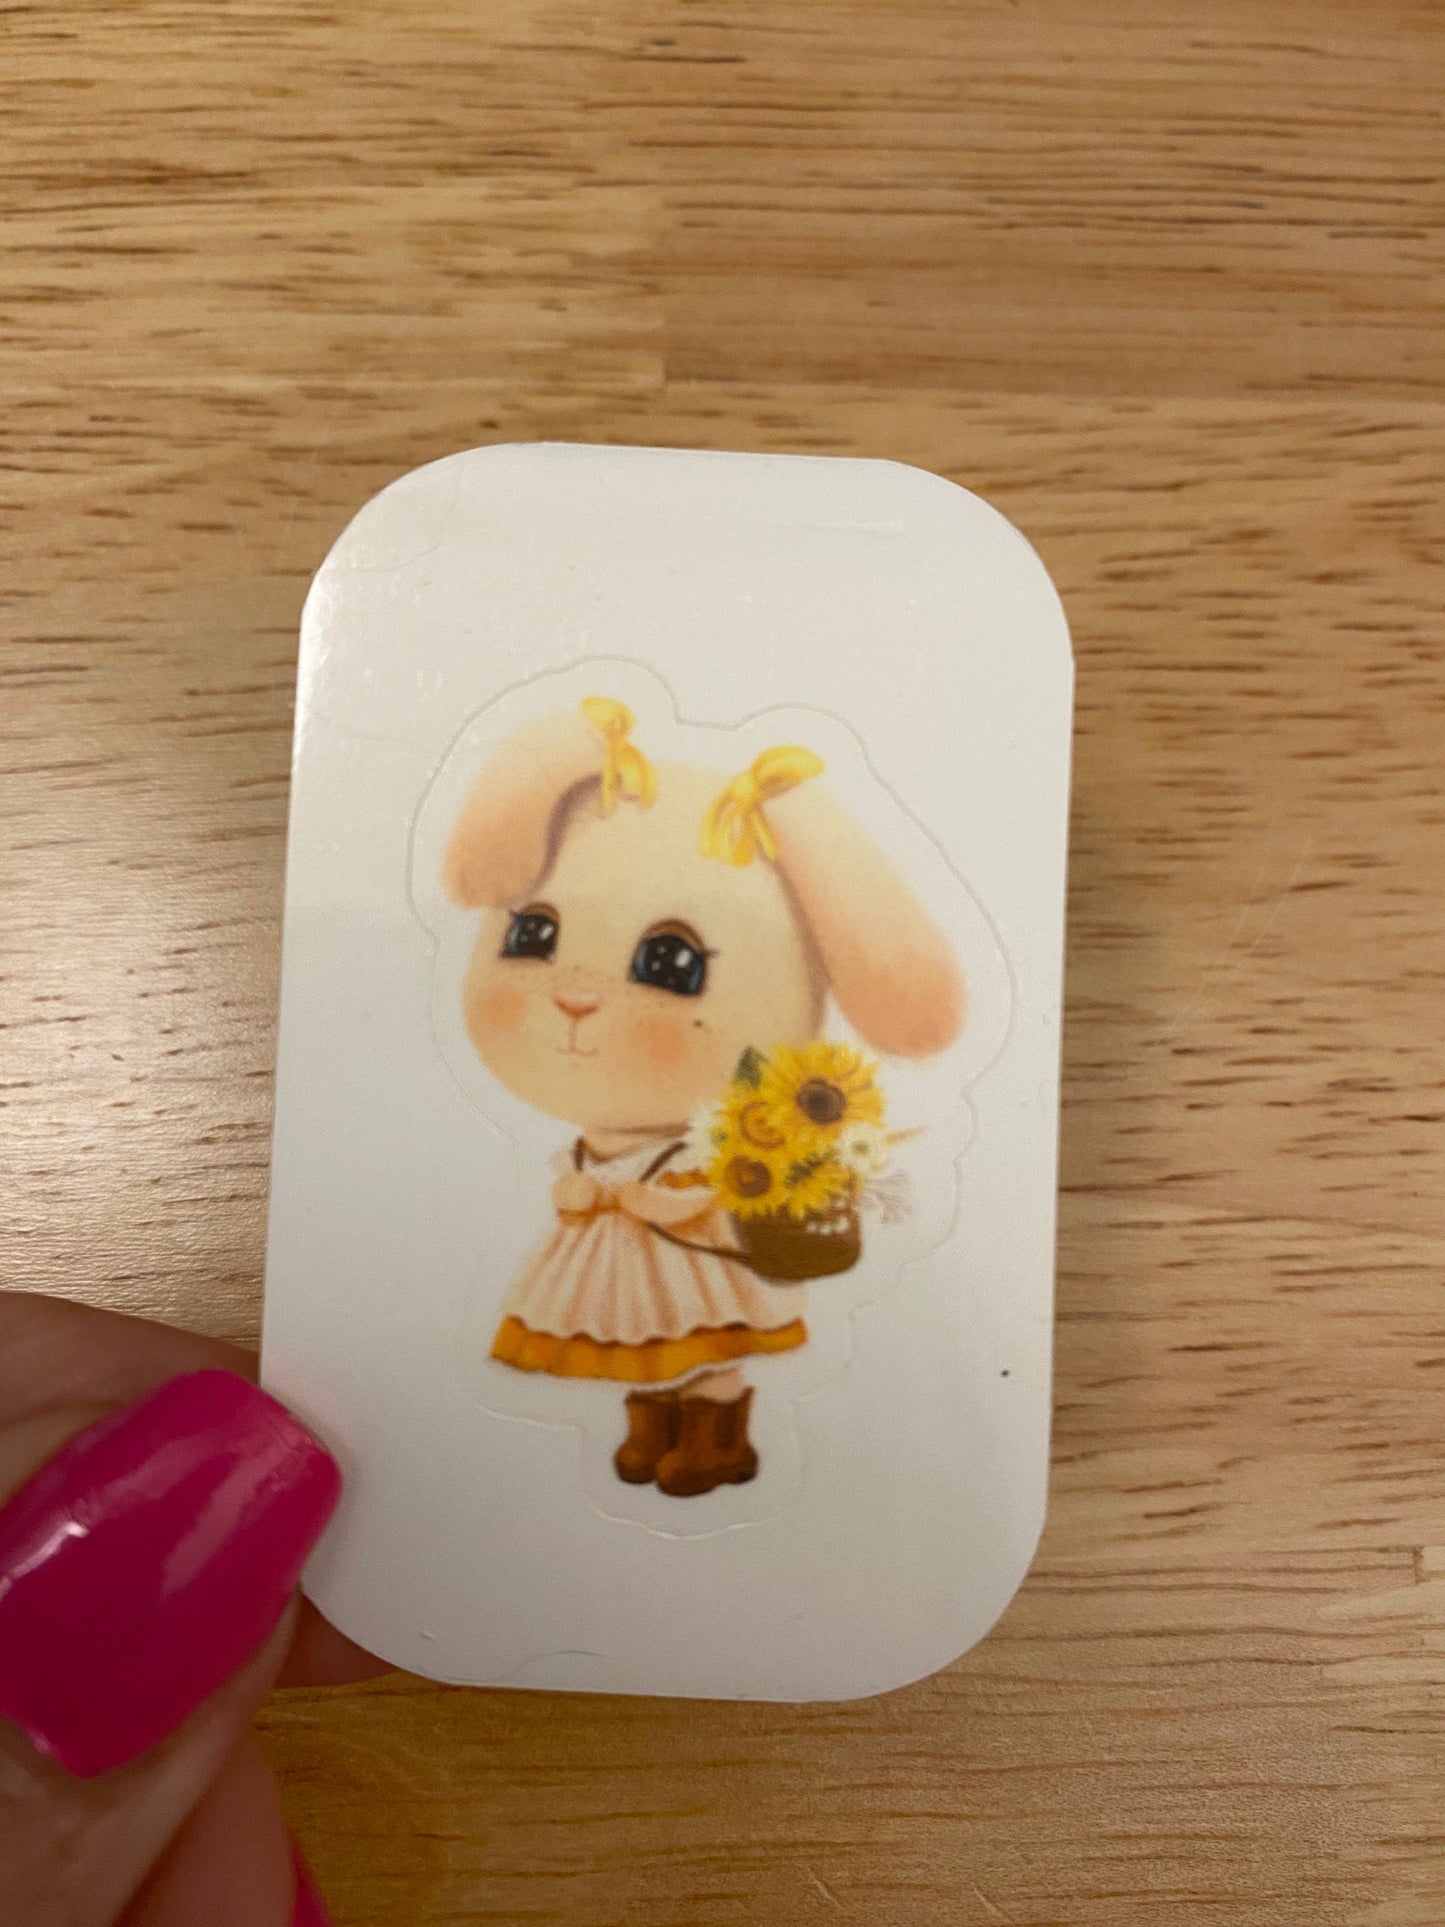 Cute Bunny with Sunflowers Sticker, Rabbit with Flowers Sticker, Bunny Sticker, Rabbit Sticker, Cute Bunny sticker with sunflowers